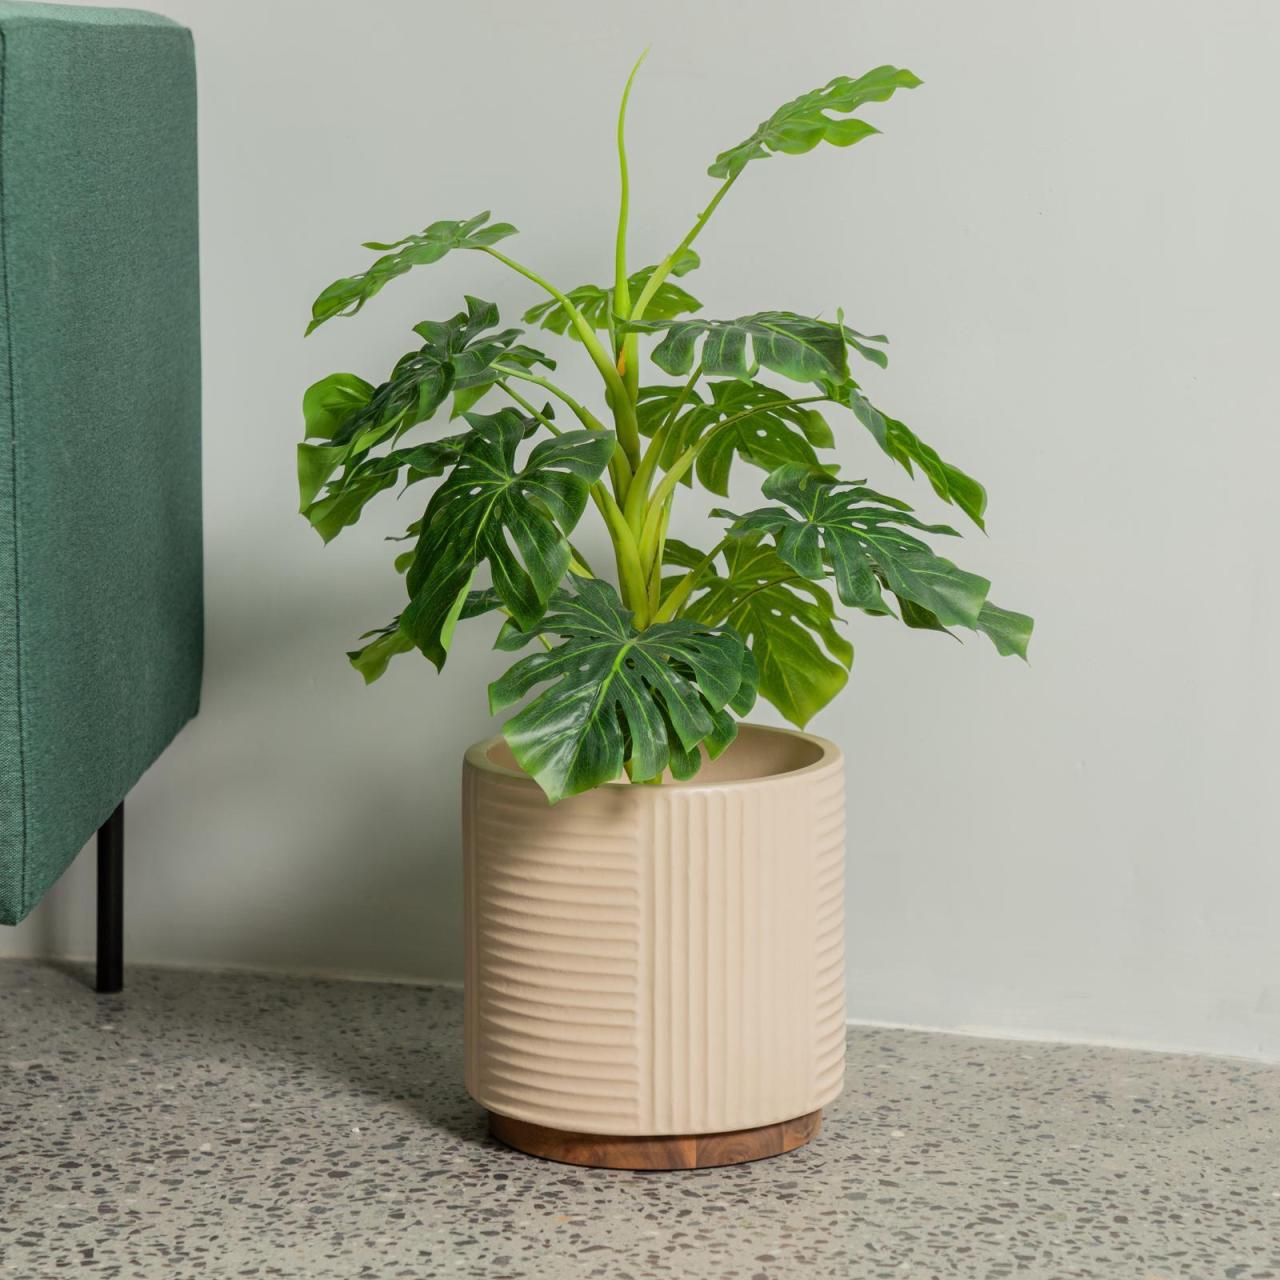 Hanging Plants Indoor | Bunnings 250mm Pot: The Essential Guide for Plant Enthusiasts